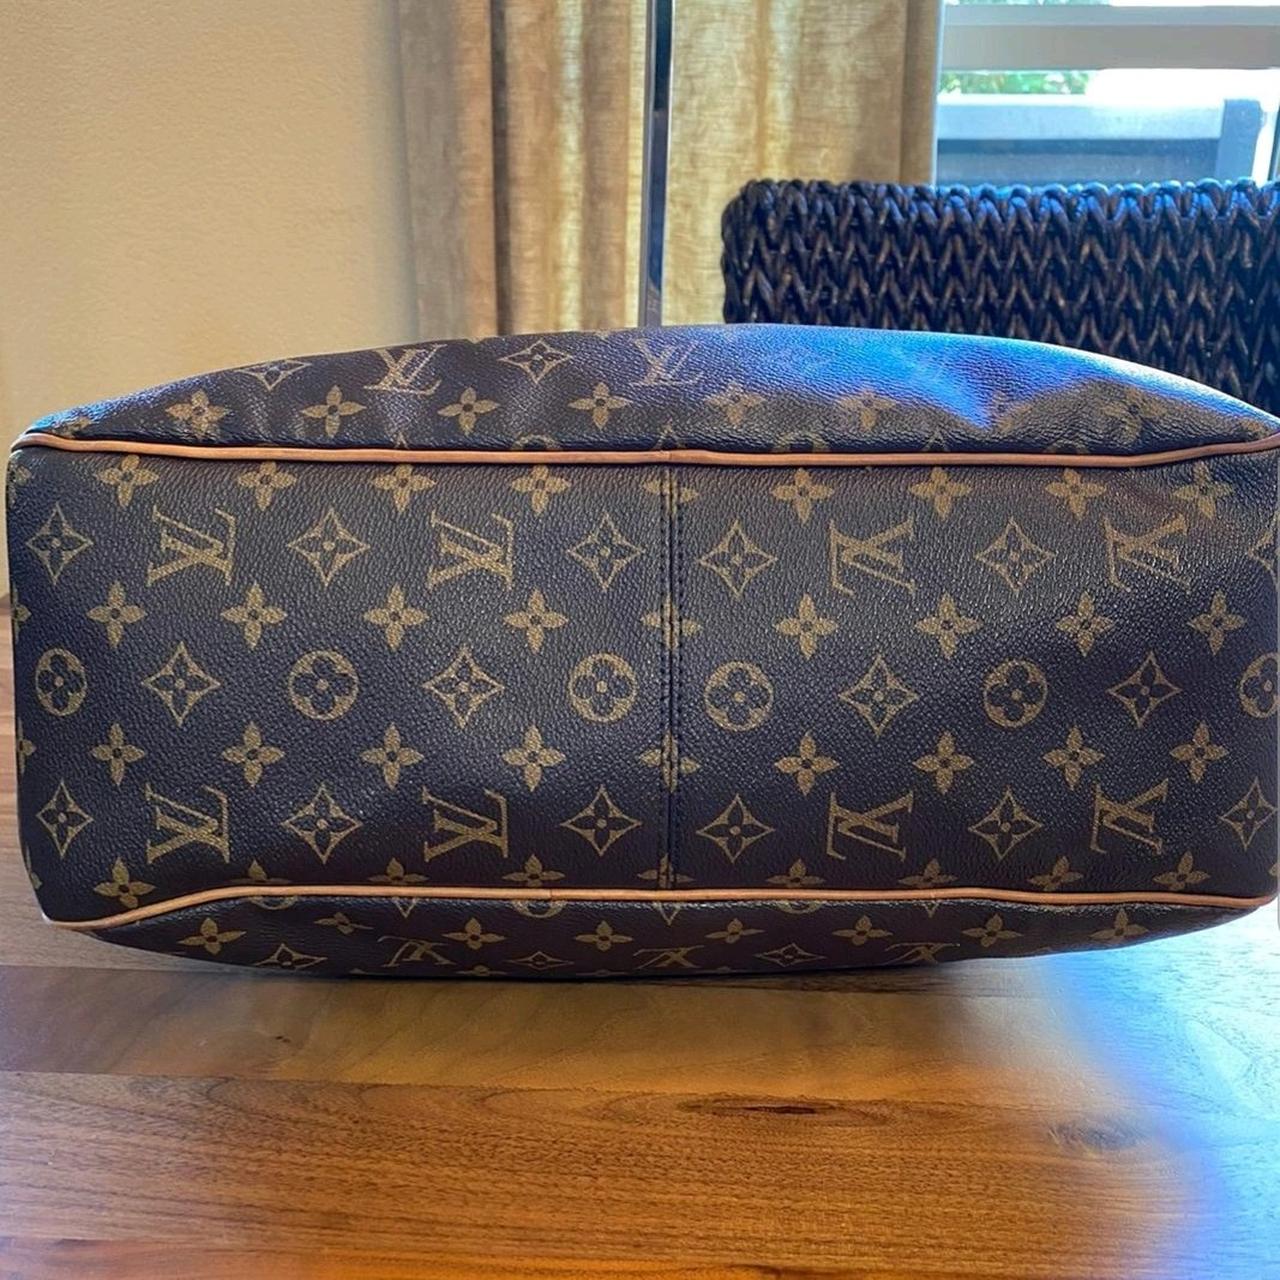 LV Delightful GM Condition 9/10 Leather in perfect - Depop